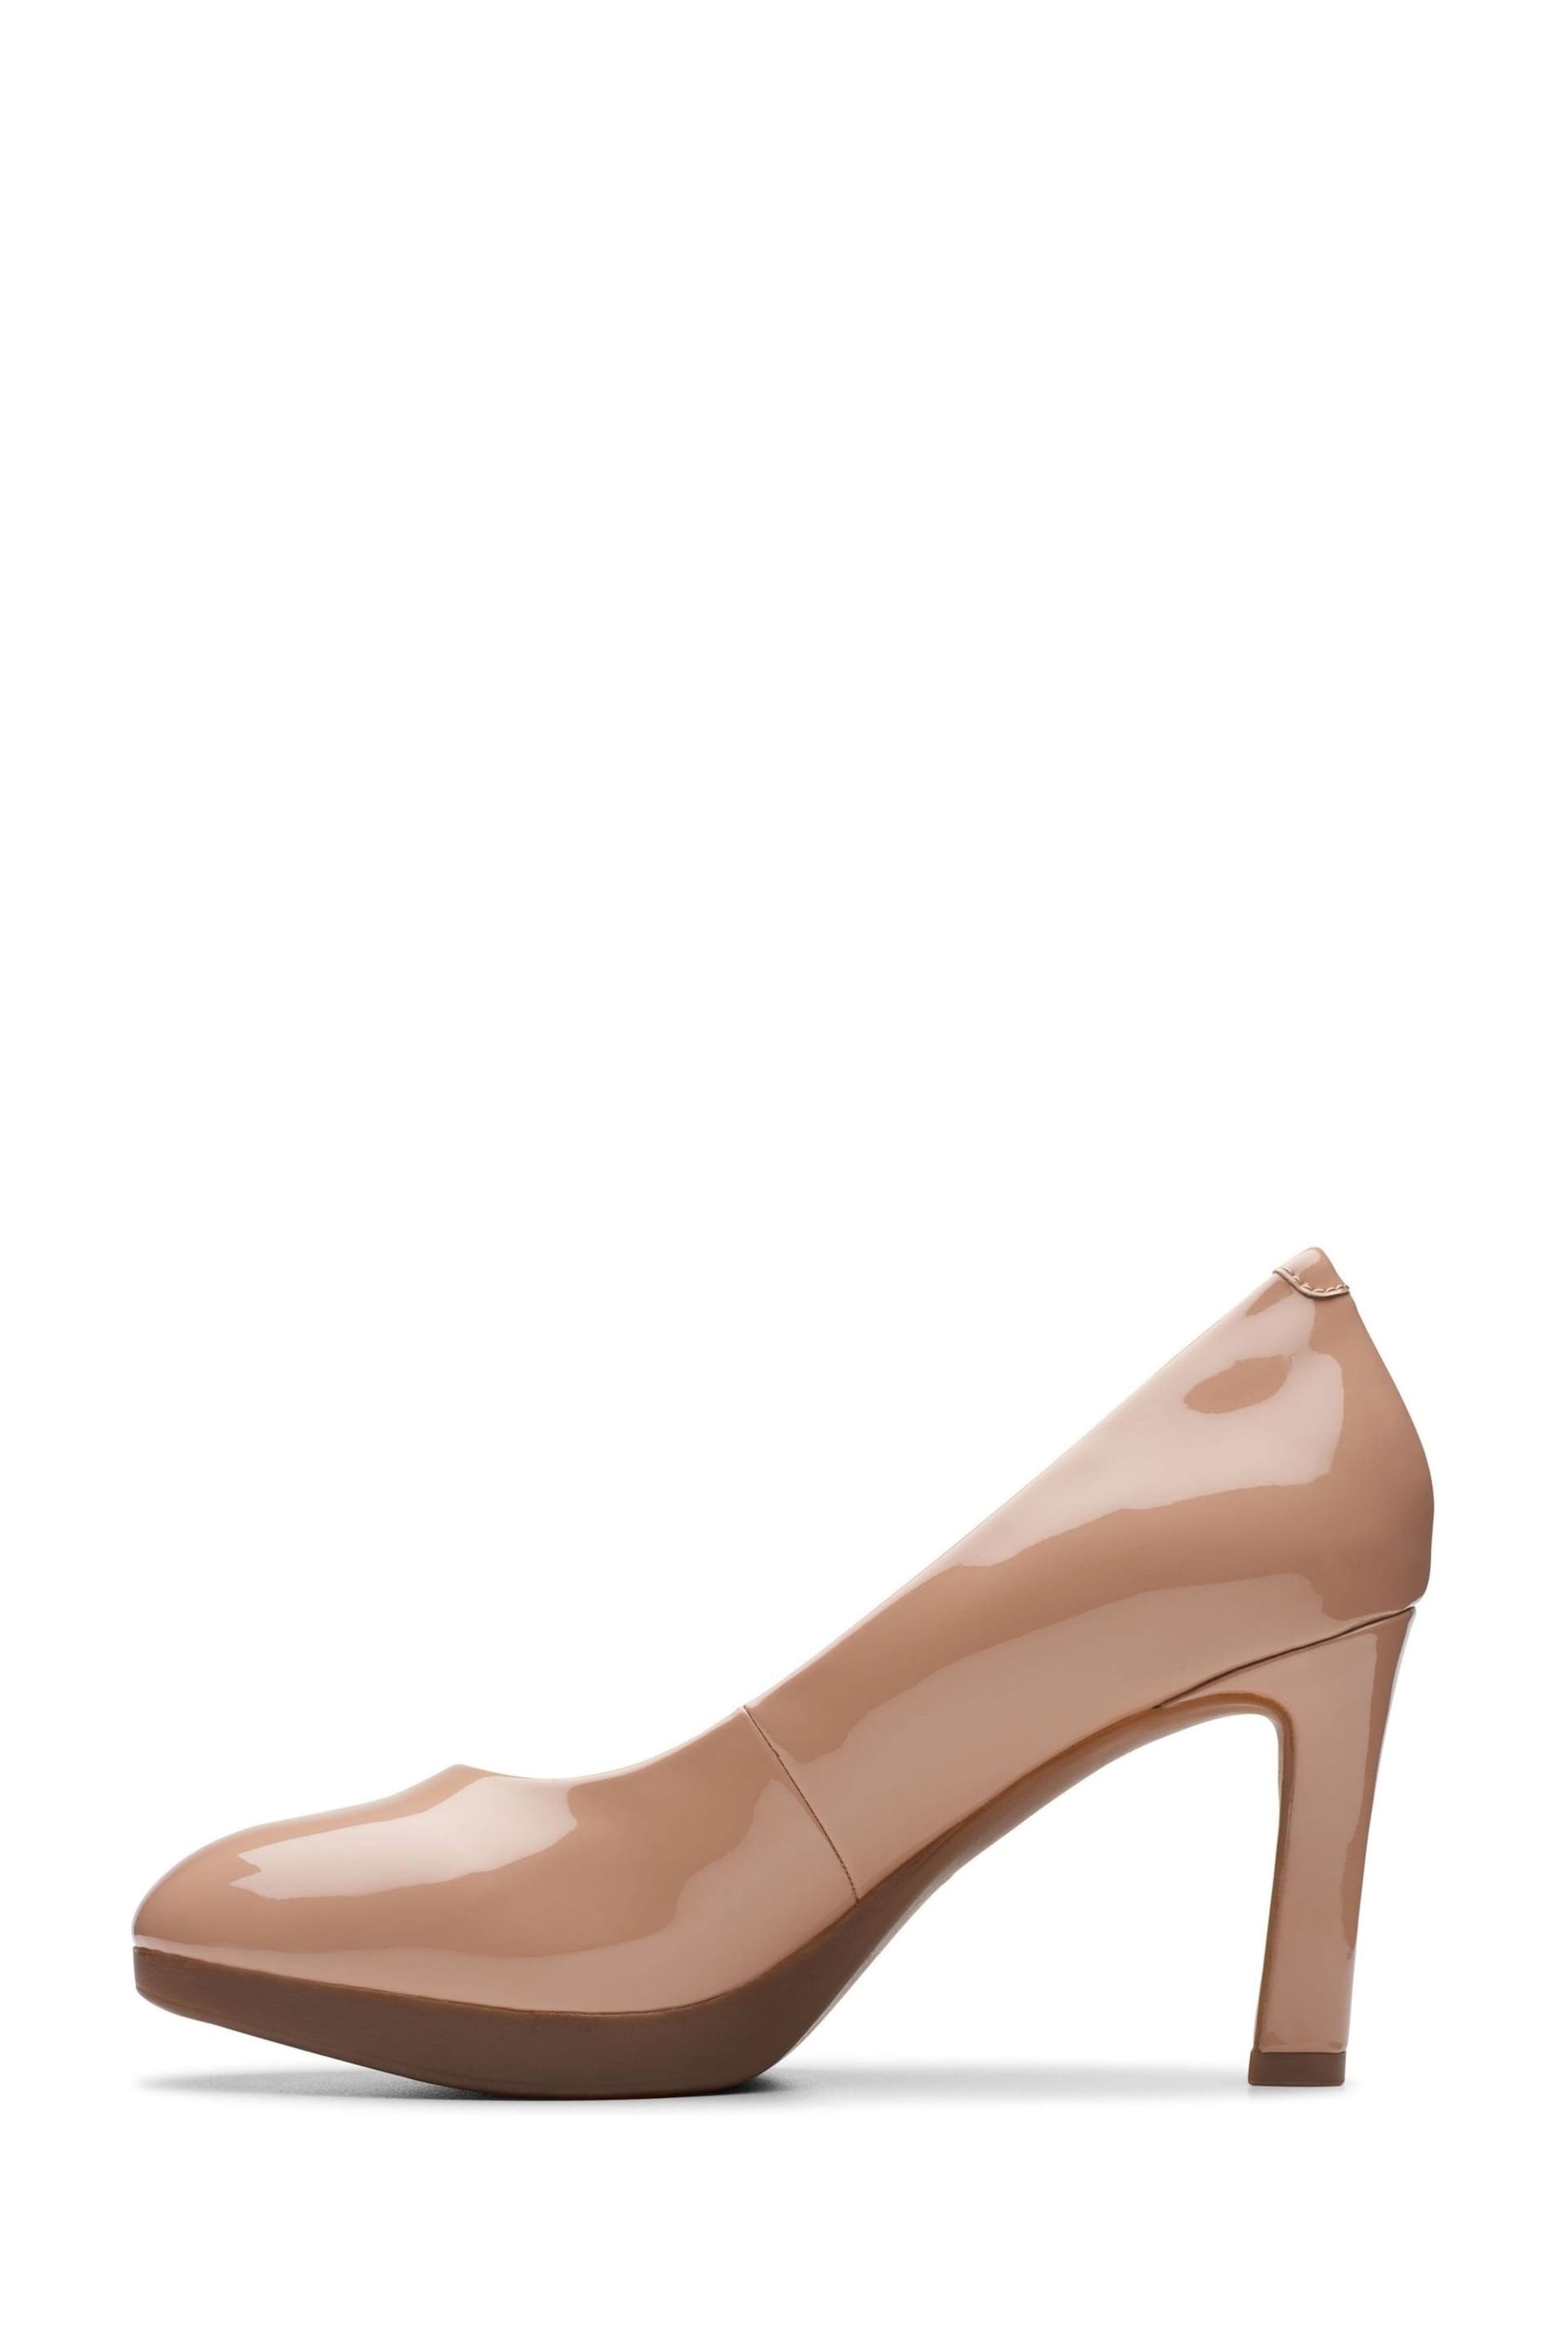 Clarks Nude Praline Patent Ambyr 2 Braley Shoes - Image 6 of 7